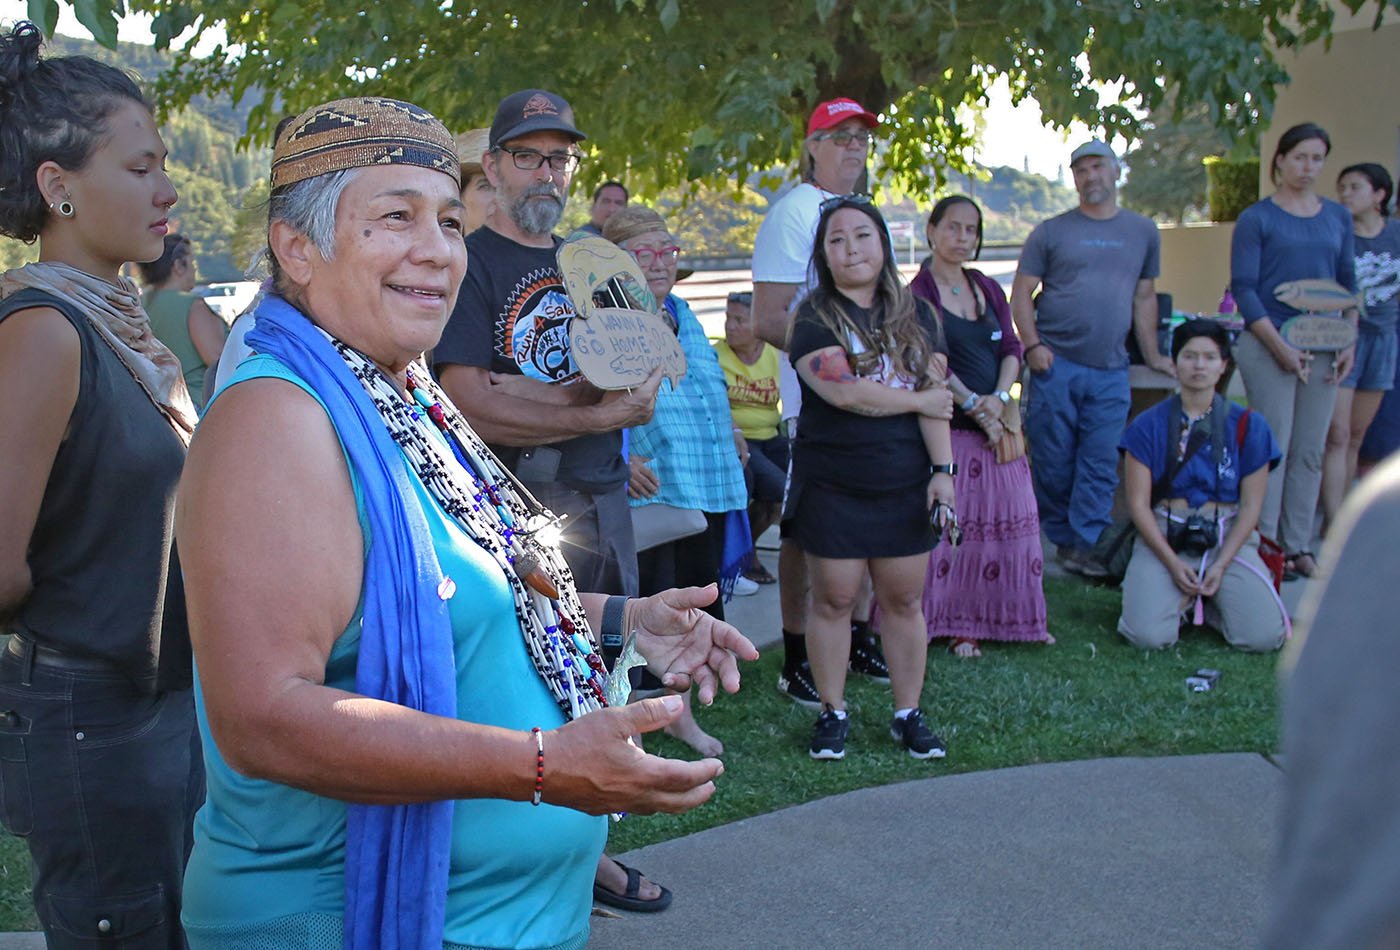  Shasta Lake, CA — Chief Caleen Sisk addresses supporters who are taking part in the Run4Salmon ceremony. September 25, 2019. Tom Levy/The Spiritual Edge 